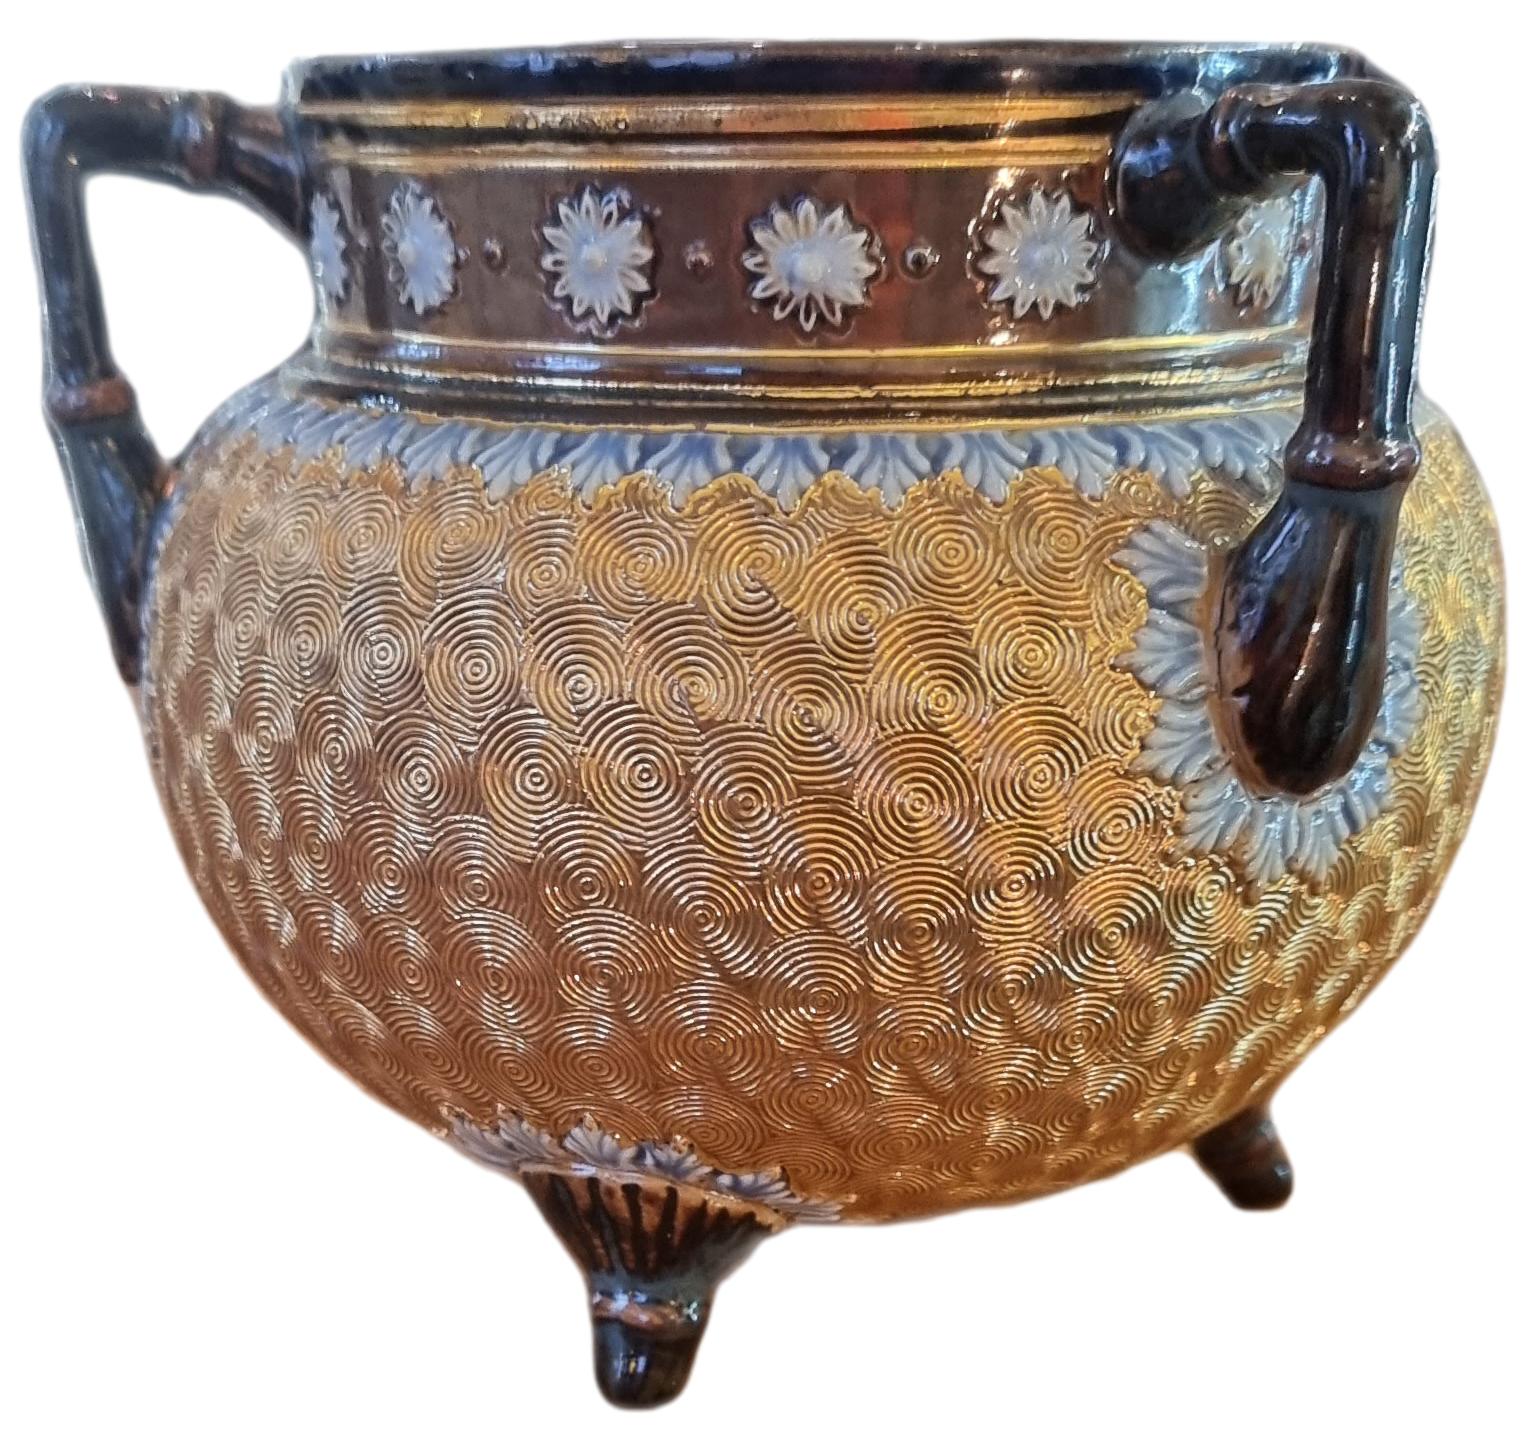 Royal Doulton pot circa 1904. Three Handled squat pot with gold spiral decoration to its body and brown glazed handles and rim with a touch of blue highlights. Main photo showing the pot from an eye level angle with 2 handles and 2 legs visible.